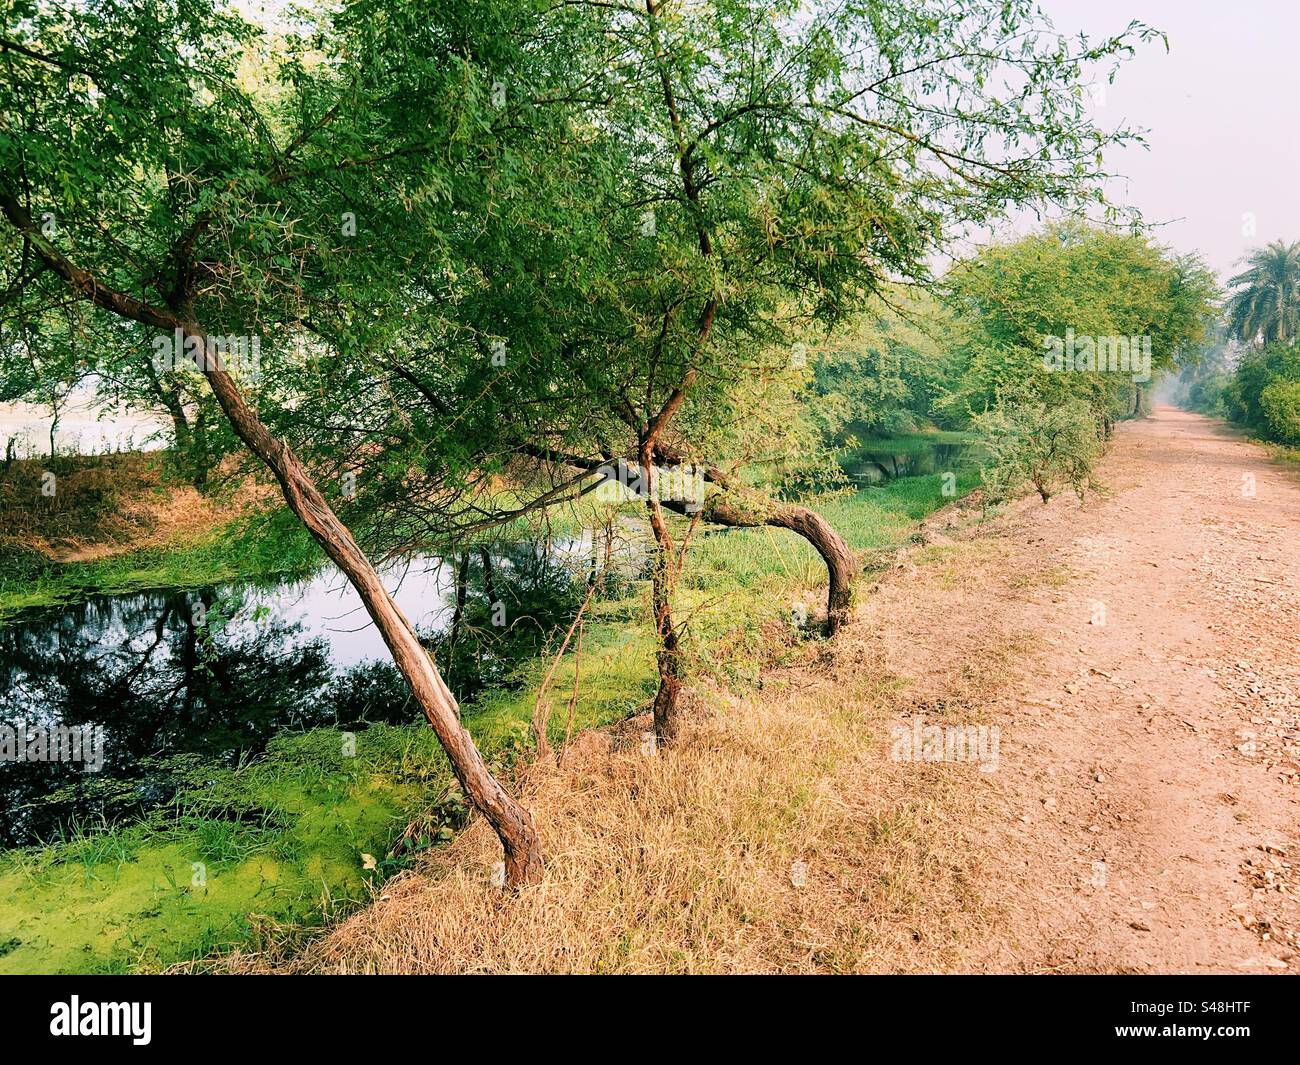 Godly scenery with trees by a canal and a forest trail through the jungle Stock Photo